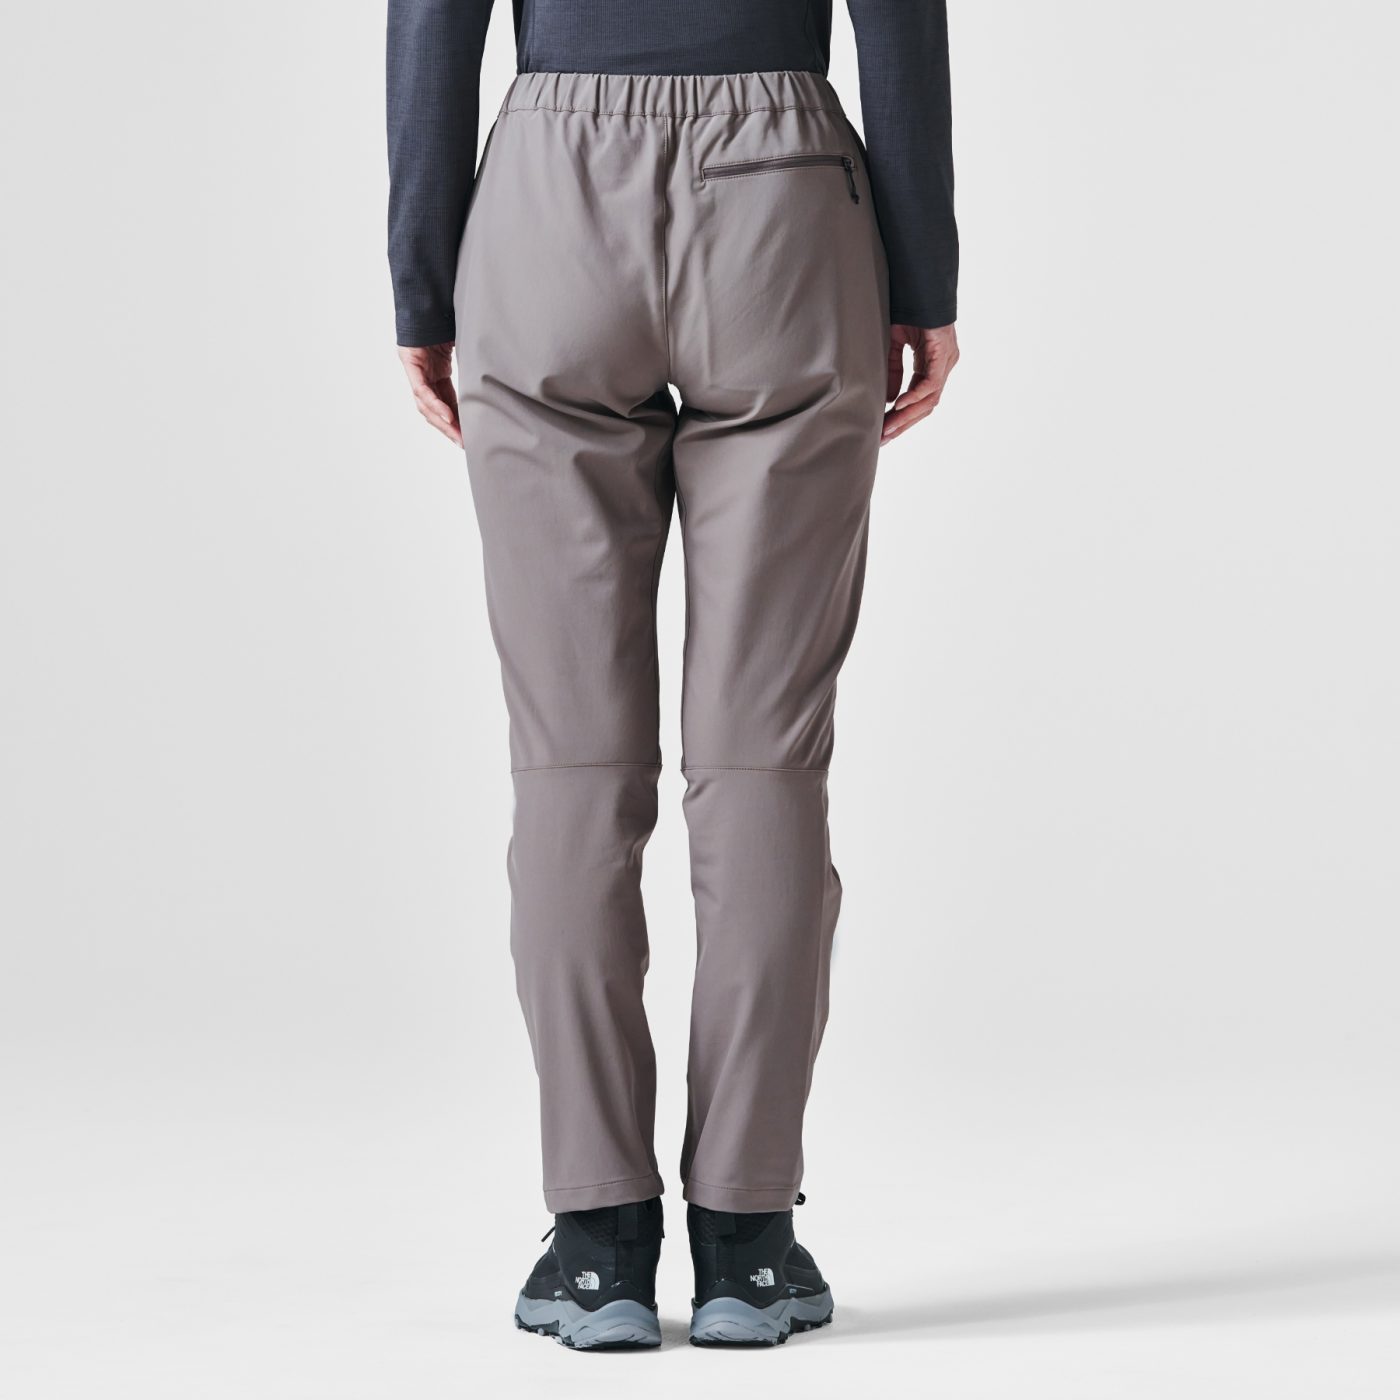 ALPINE LIGHT PANT (NBW32210) - THE NORTH FACE MOUNTAIN